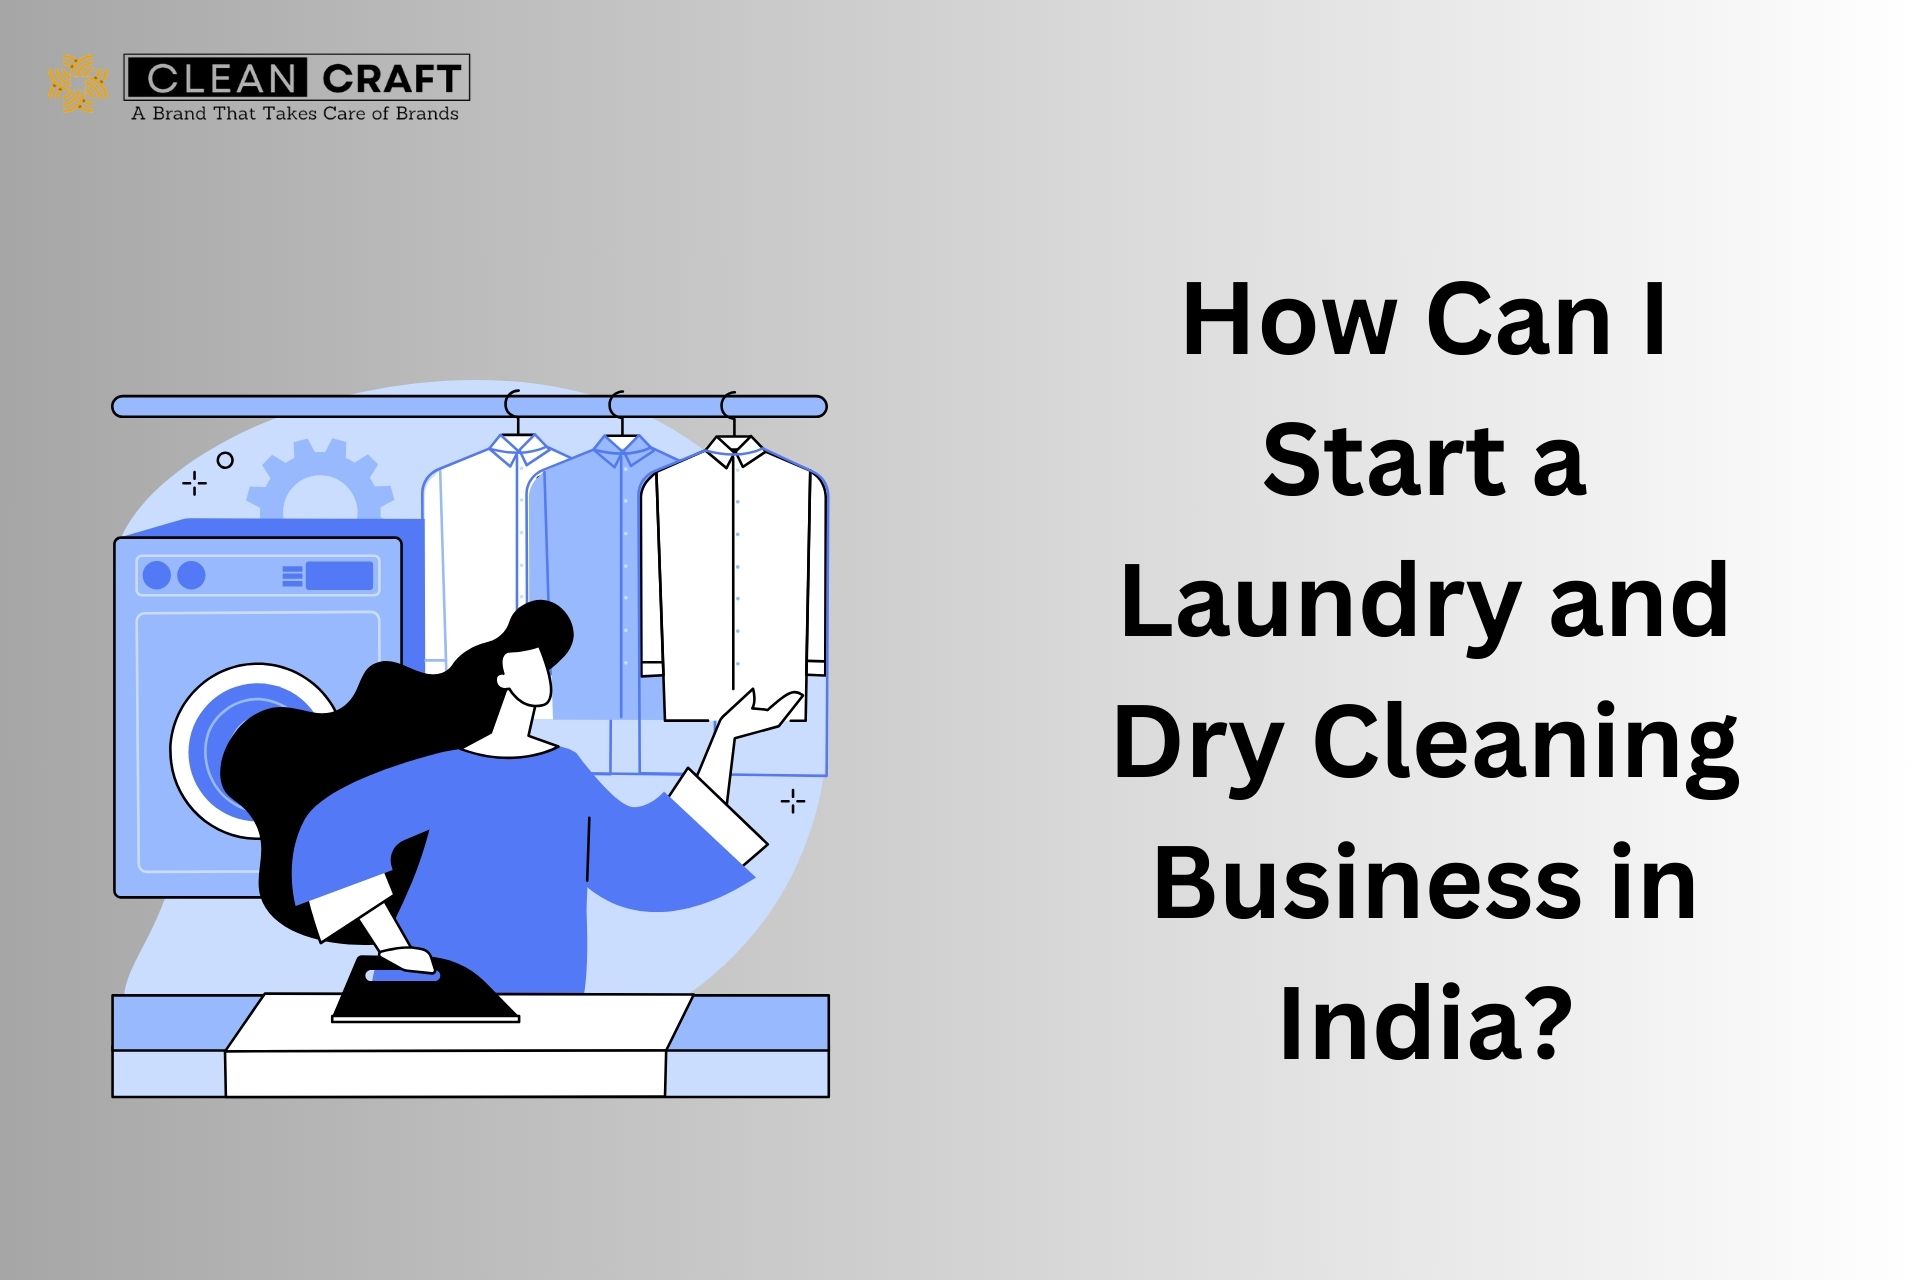 How can I start a  laundry and dry cleaning business in India?